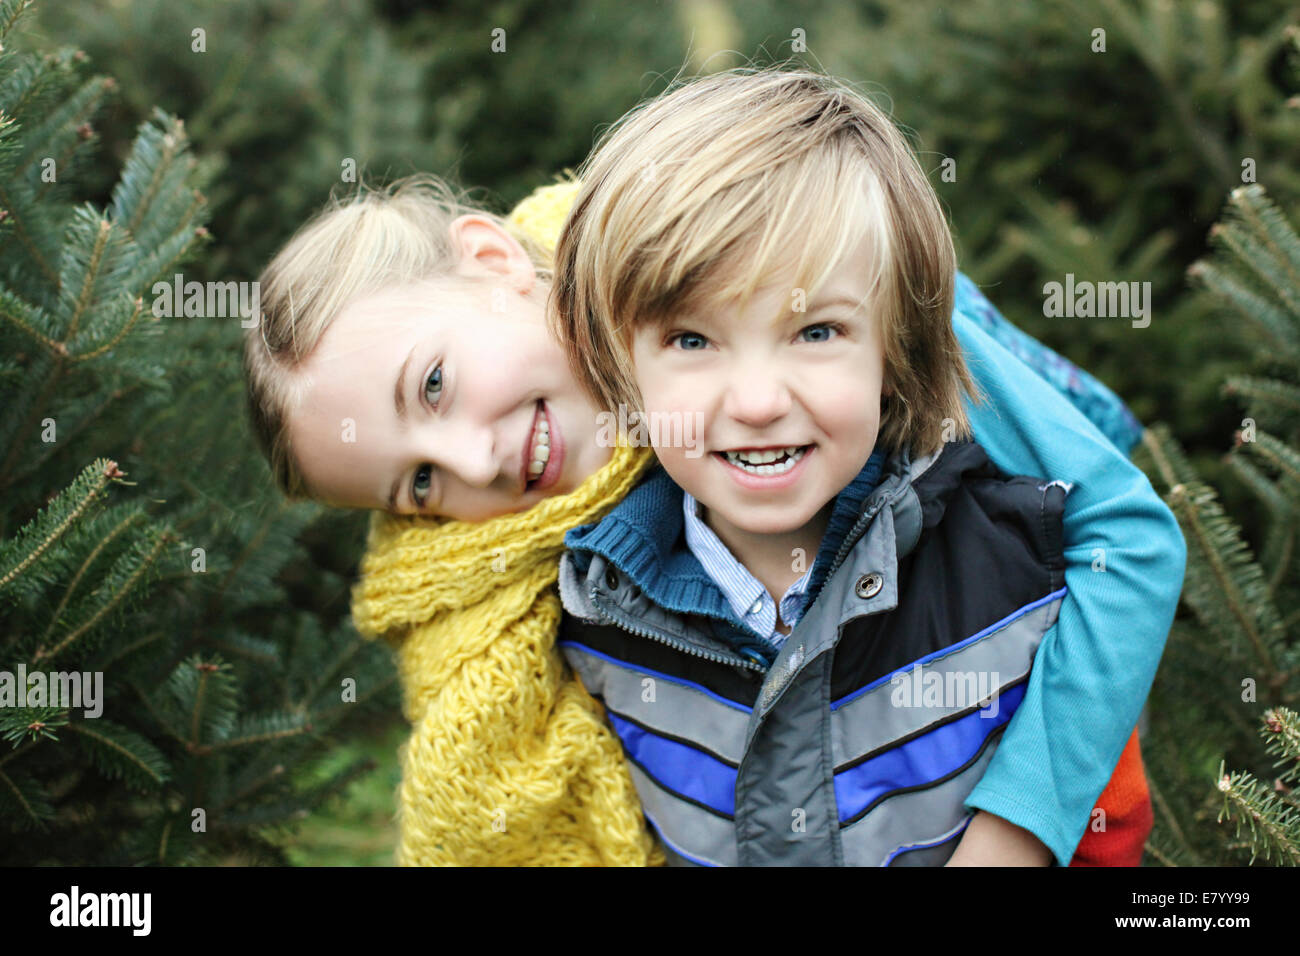 Portrait of boy (6-7) and girl (6-7) in forest Banque D'Images